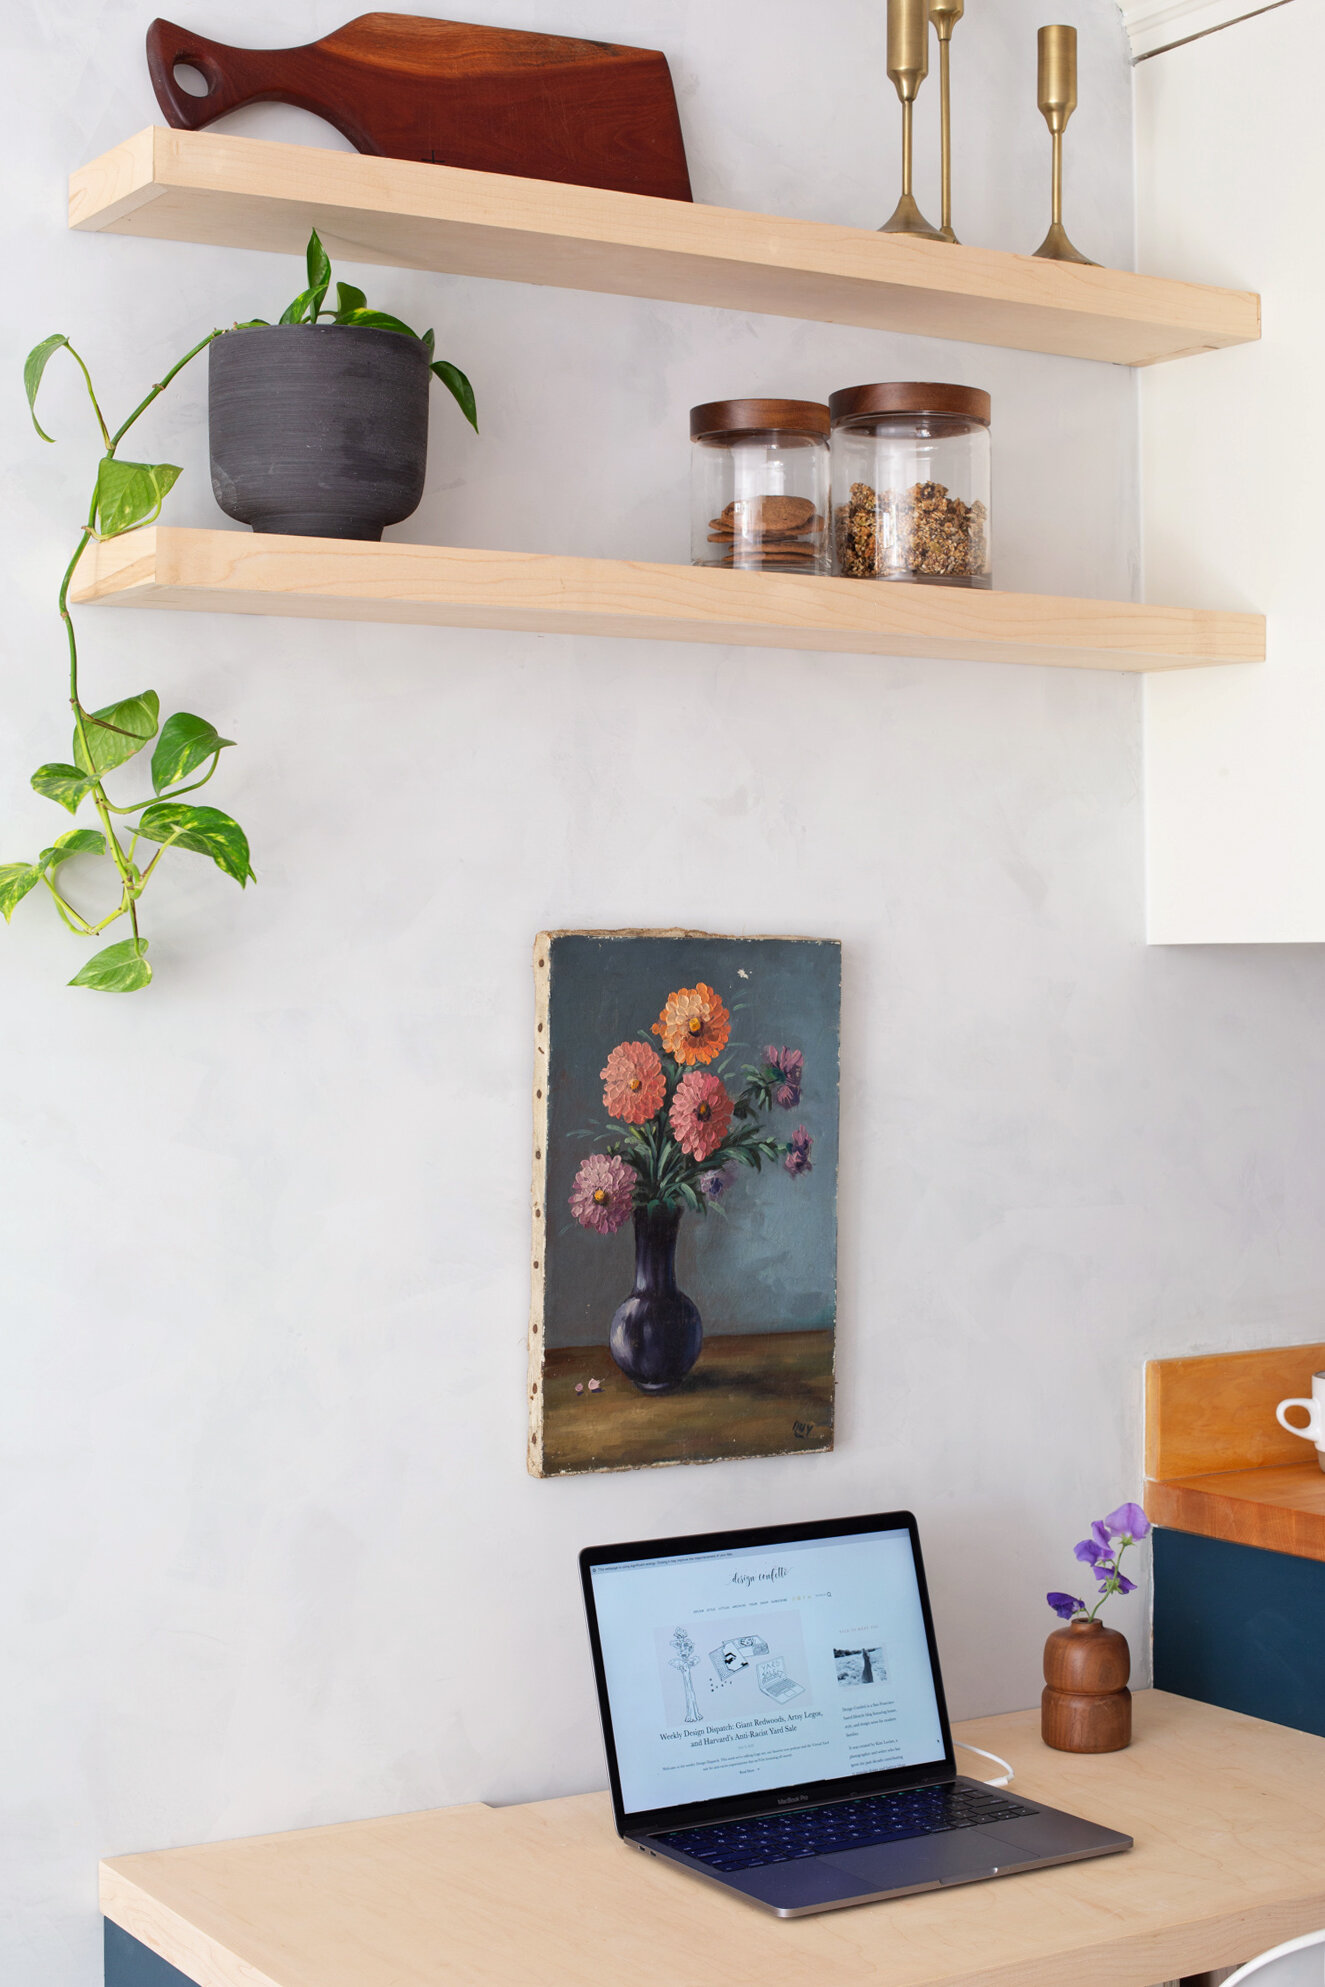  The floating shelves help to tie the kitchen and office together and create more open storage to display pretty objects. 